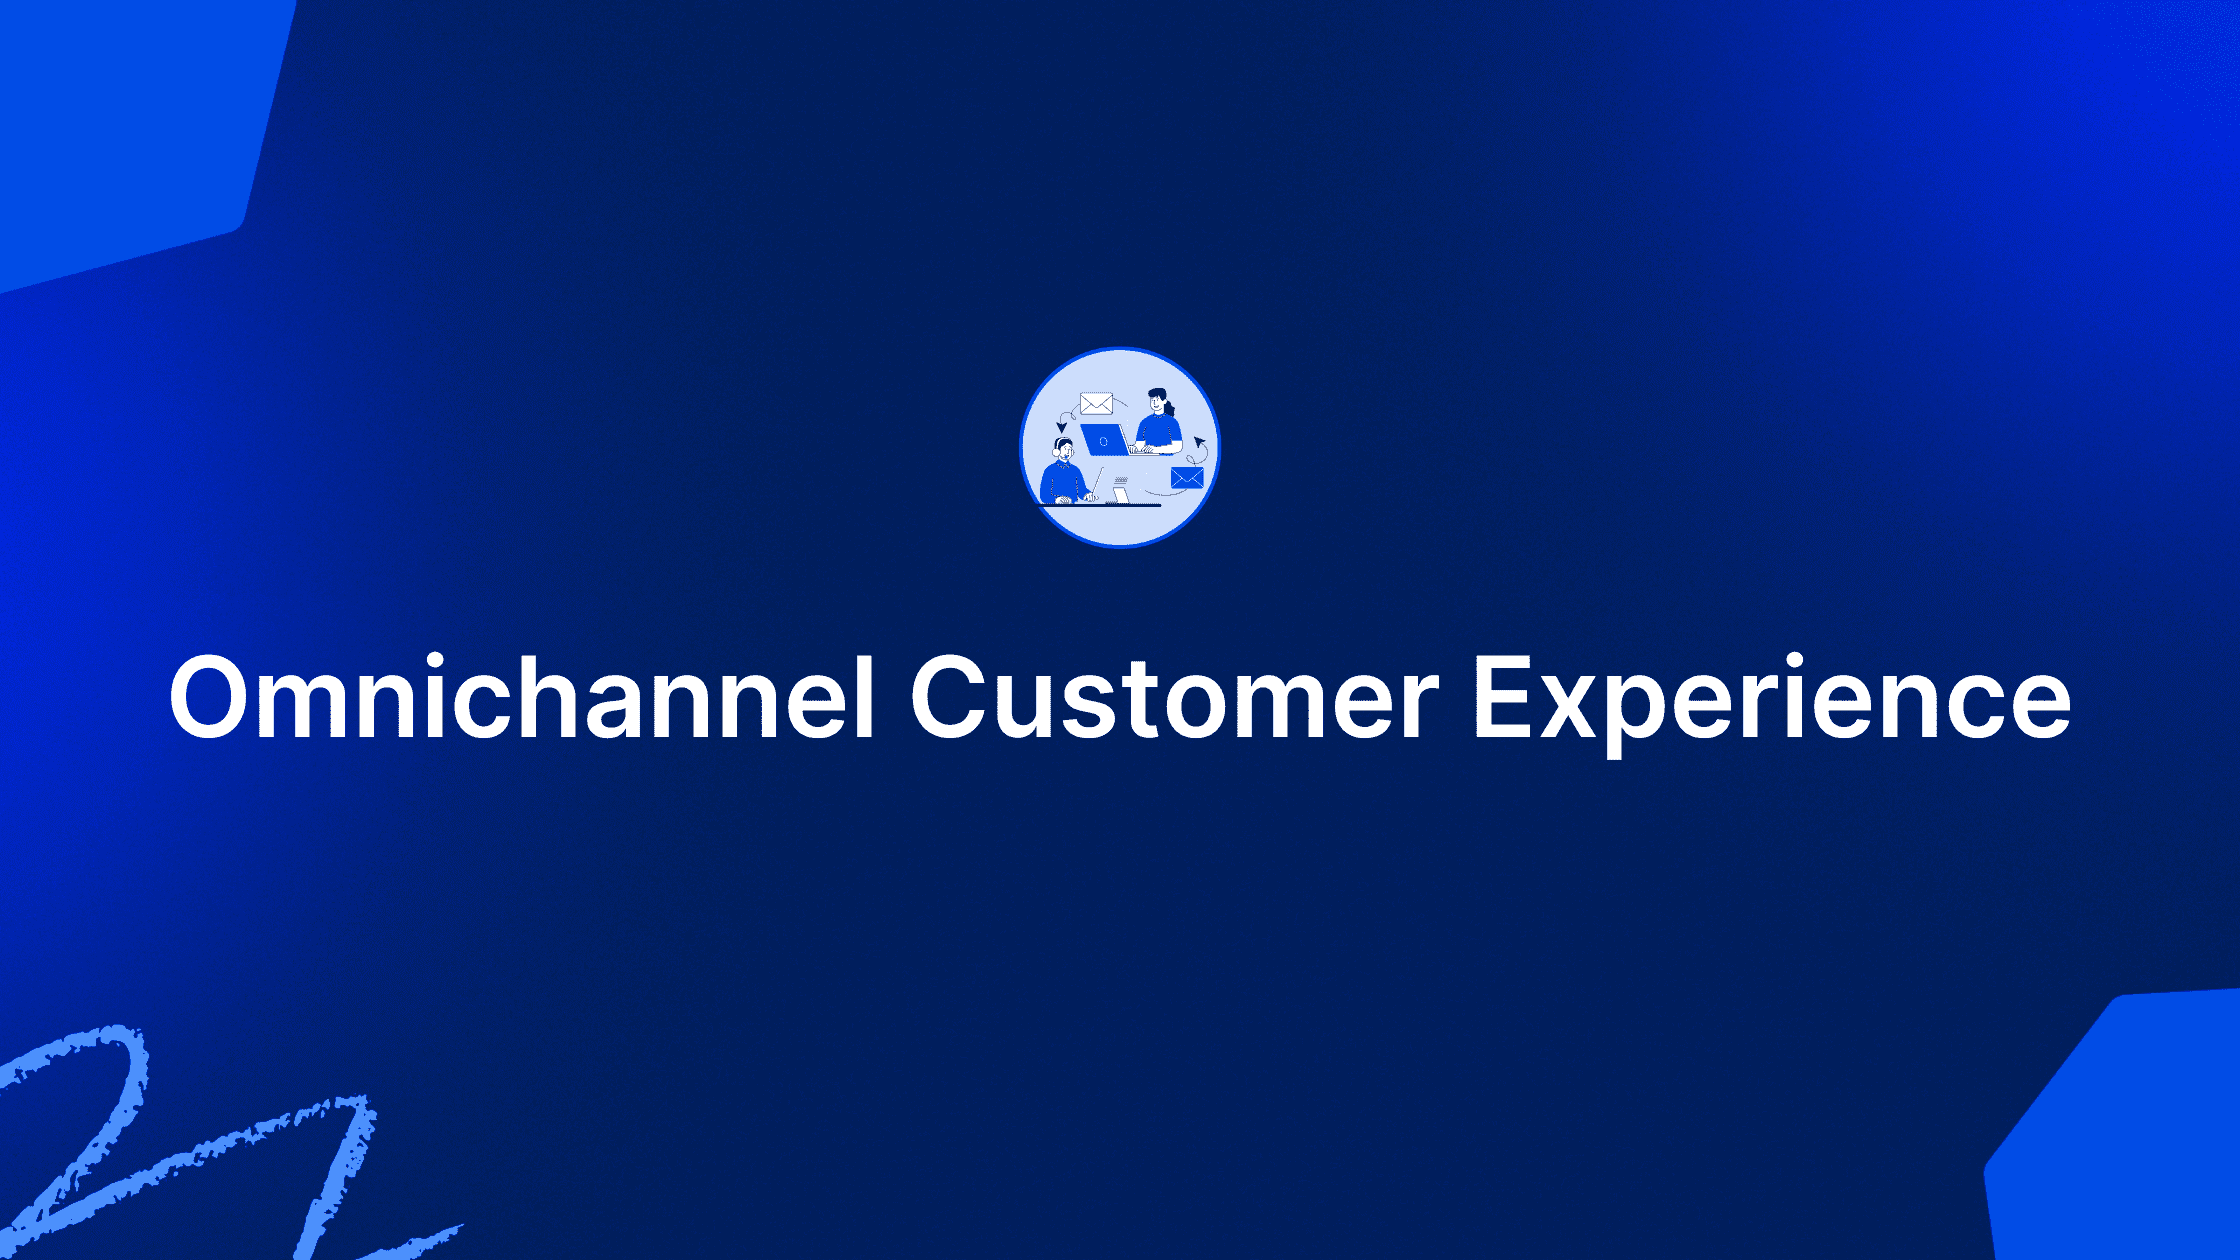 What Is an Omnichannel Customer Experience?